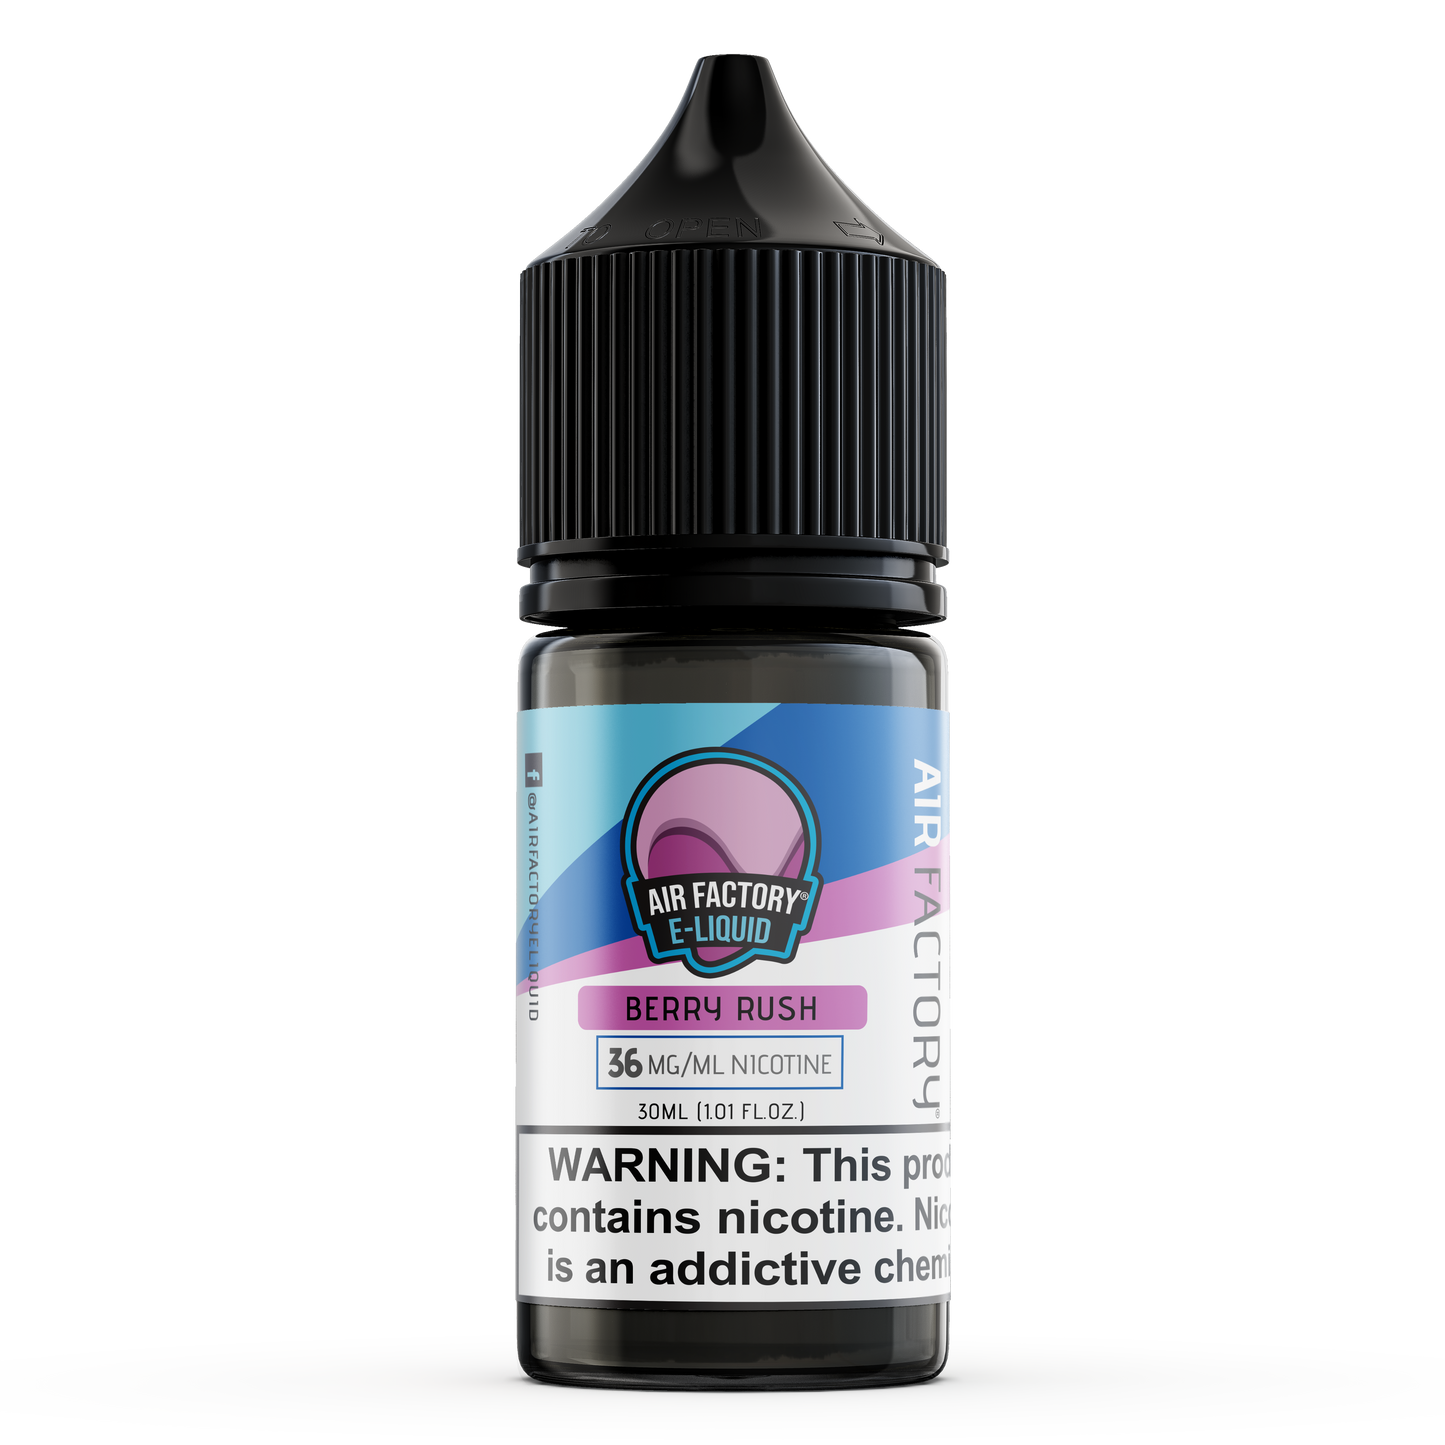 Berry Rush by Air Factory Salt eJuice 30mL bottle